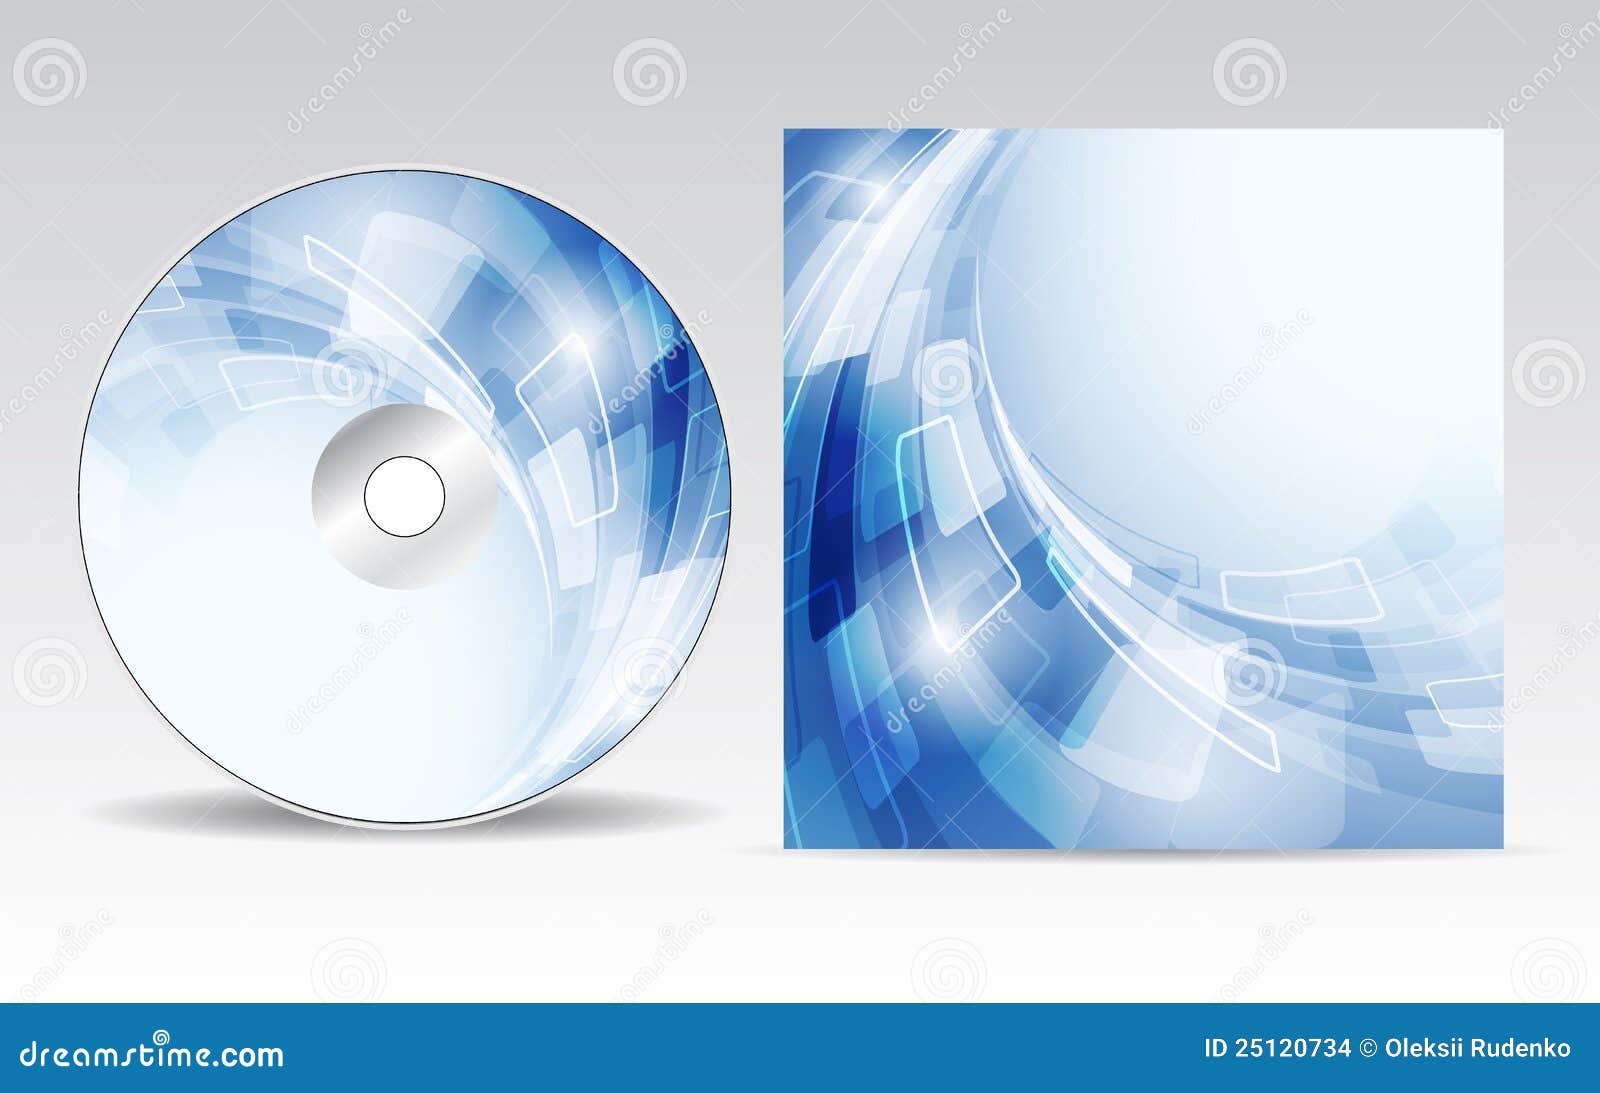 CD Cover Design Stock Images - Image: 25120734